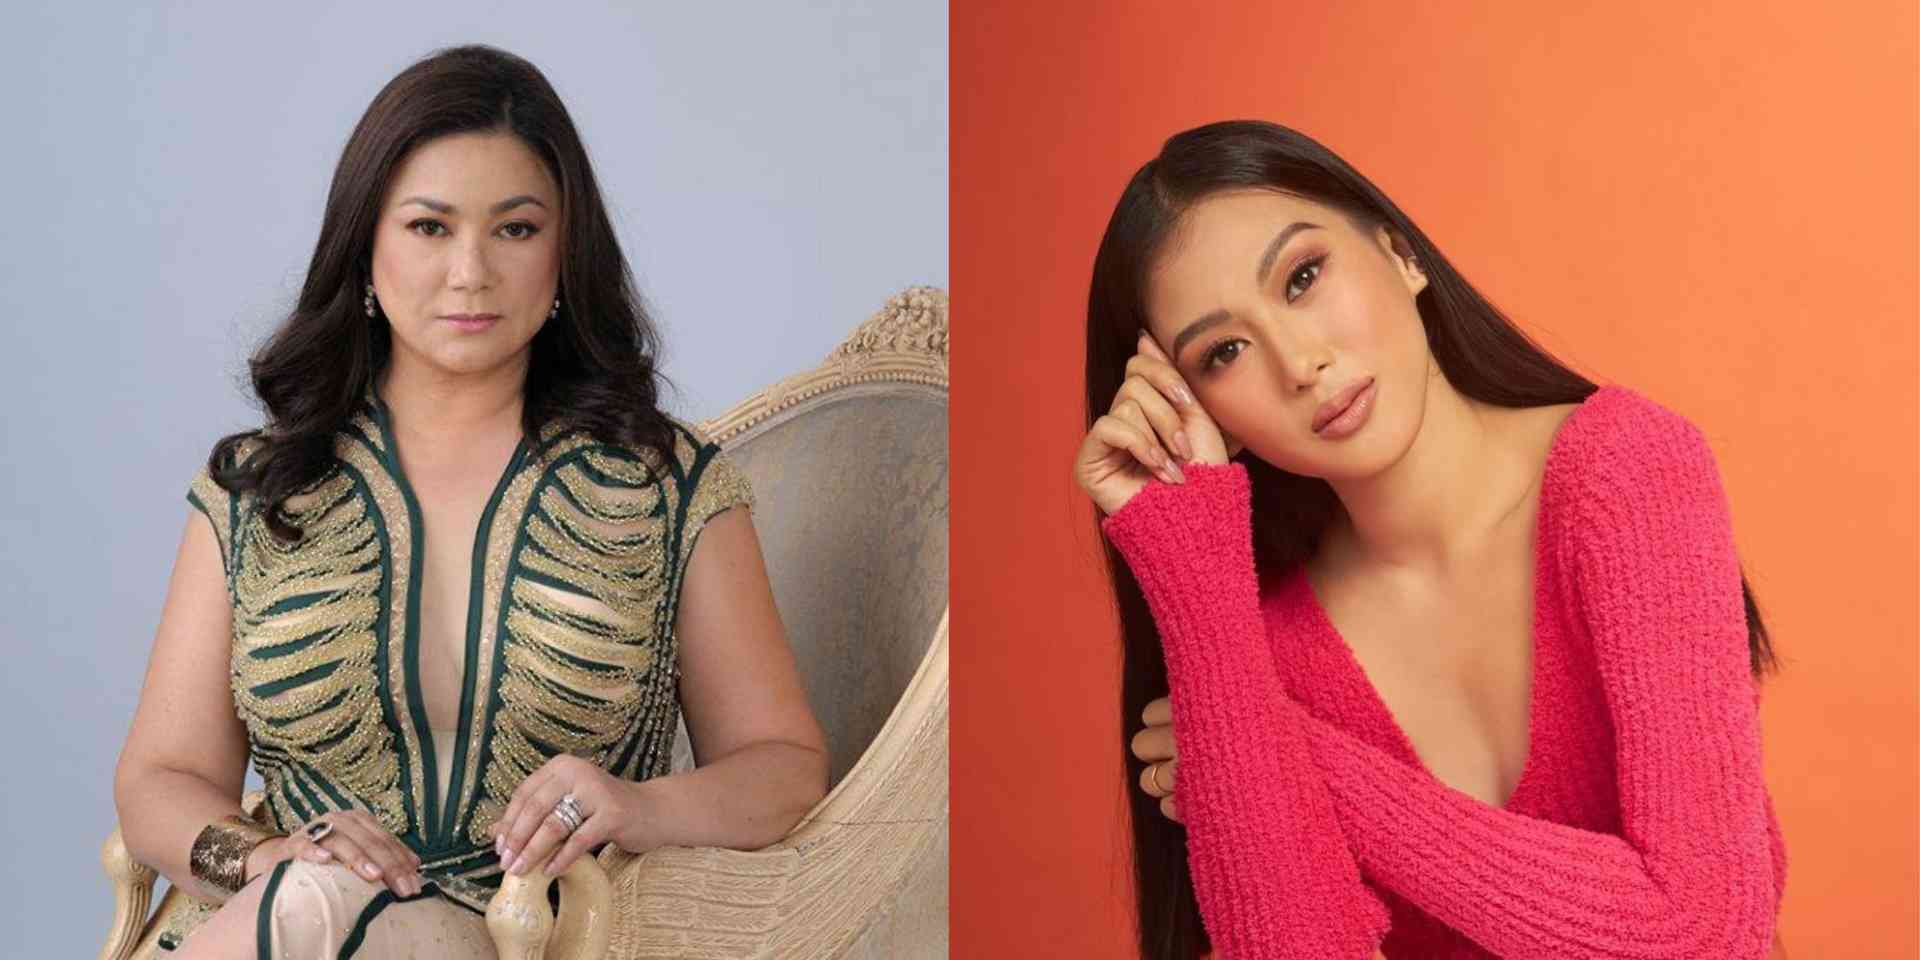 Dina Bonnevie confirms Alex Gonzaga is the 'unprofessional' co-worker in her viral clip